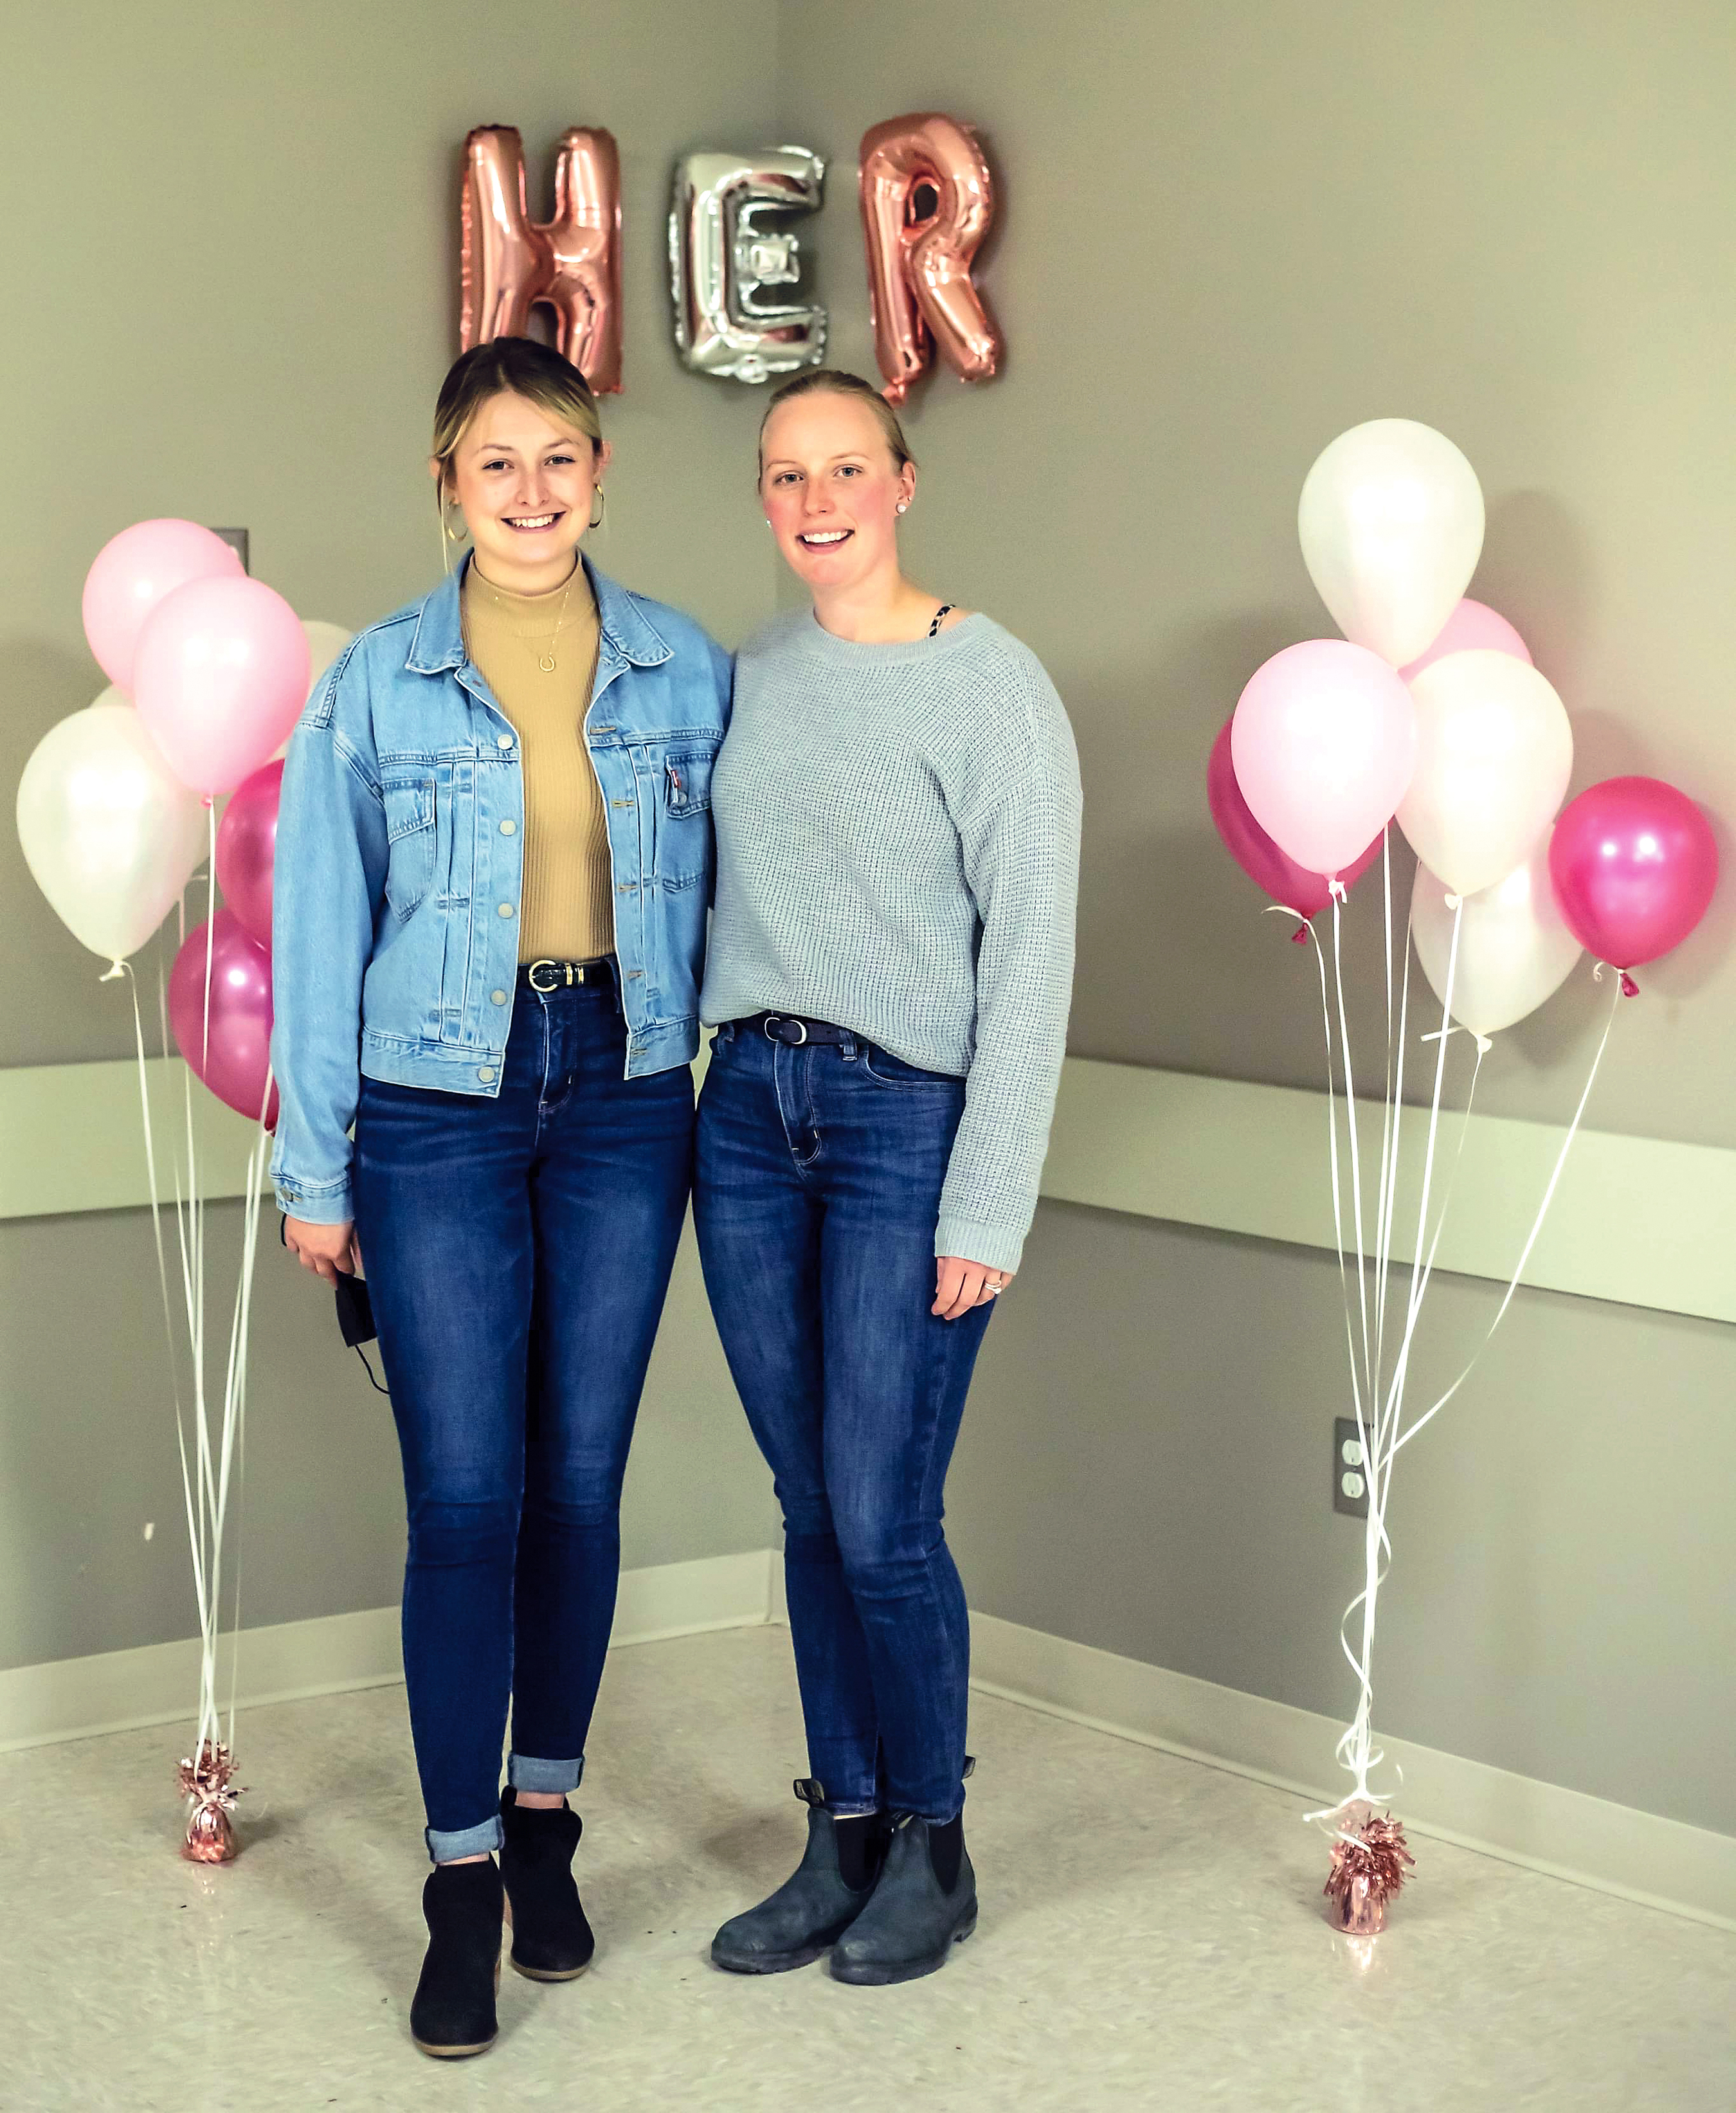 Paige Hutchinson, the president of HER Girl Club and Lauren van Dyke, the vice-president at the celebration of the group’s one year.